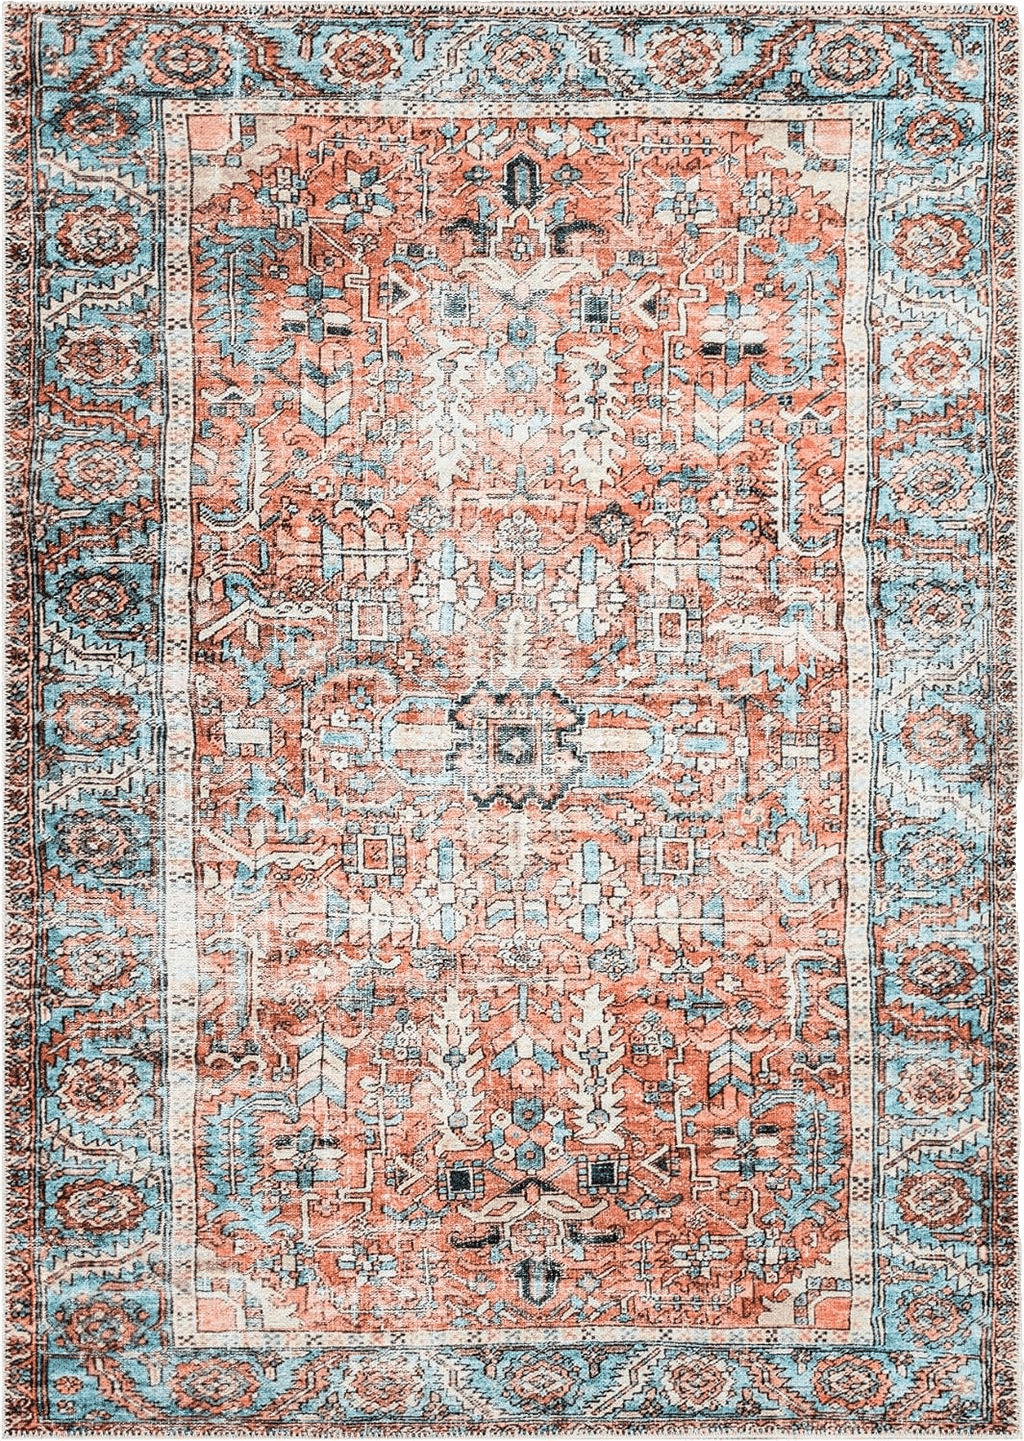 Caria Bloom Rugs Washable Non-Slip 5' x 7' Rug - Orange/Blue Traditional Area Rug for Living Room, Bedroom, Dining Room, and Kitchen - Exact Size: 5' x 7'